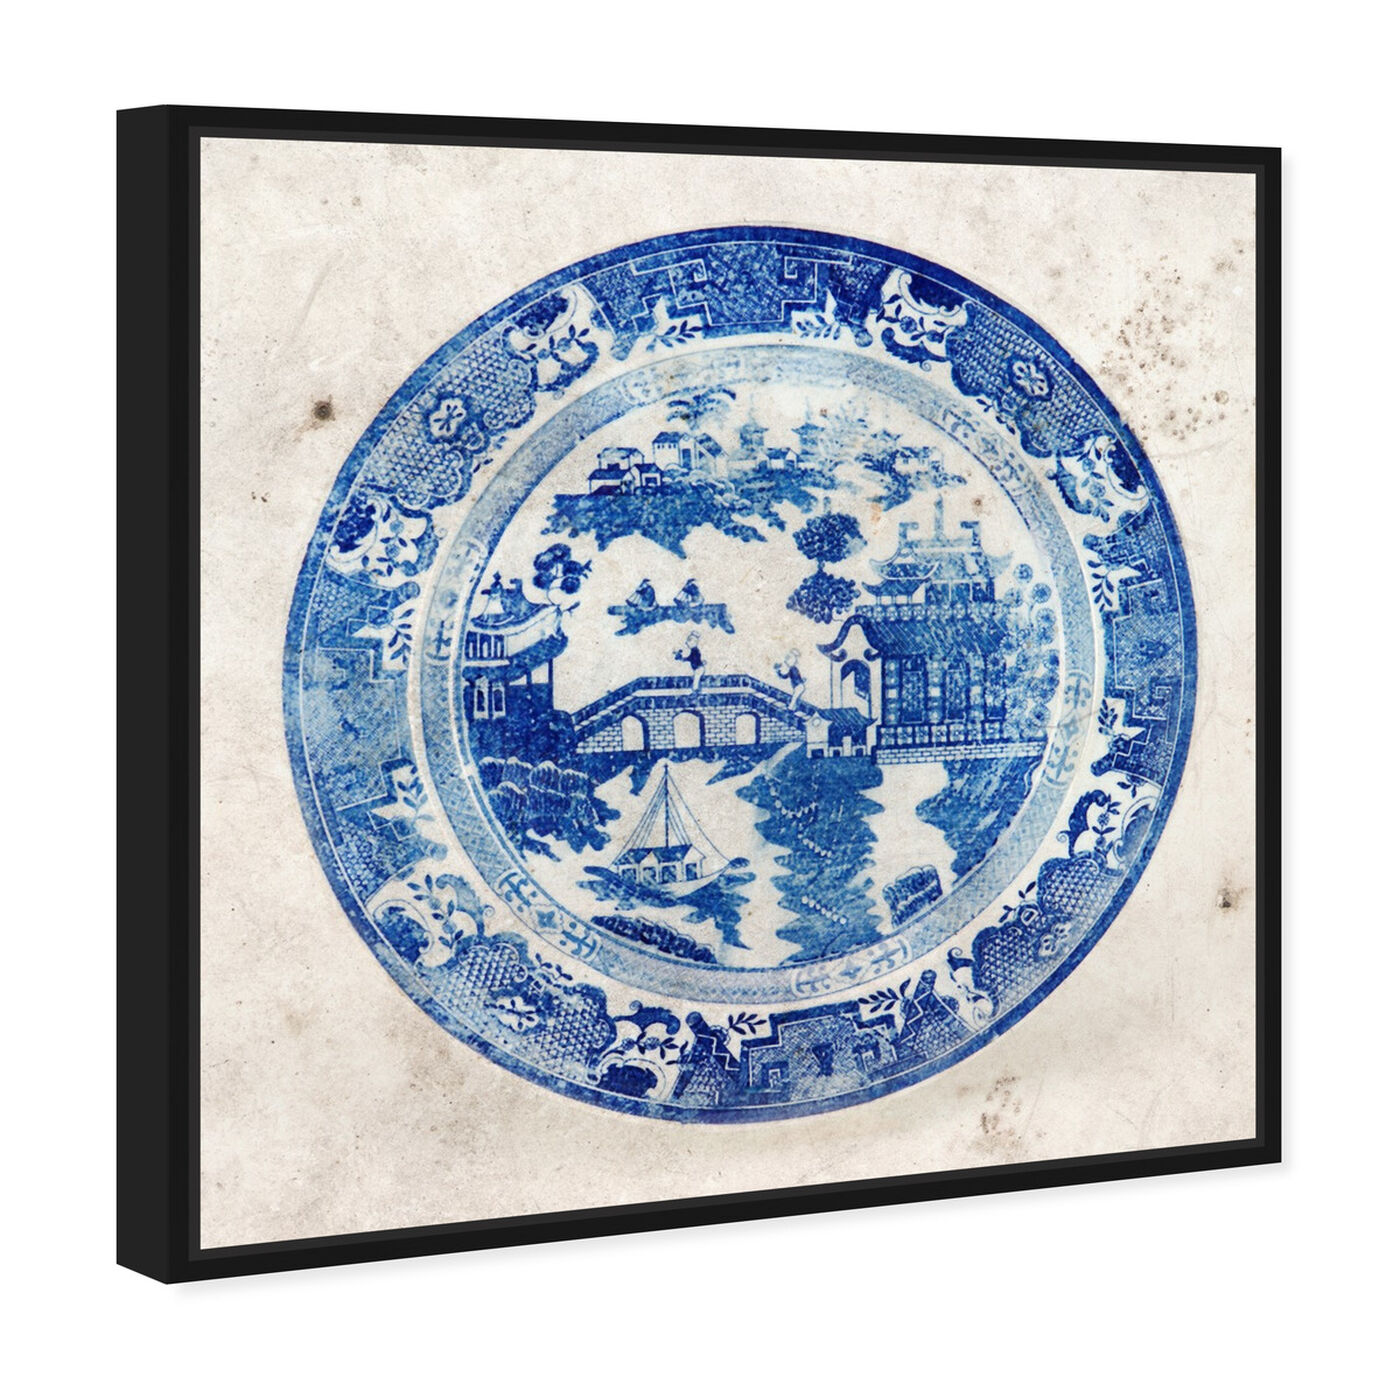 Angled view of Fajans China featuring world and countries and asian cultures art.